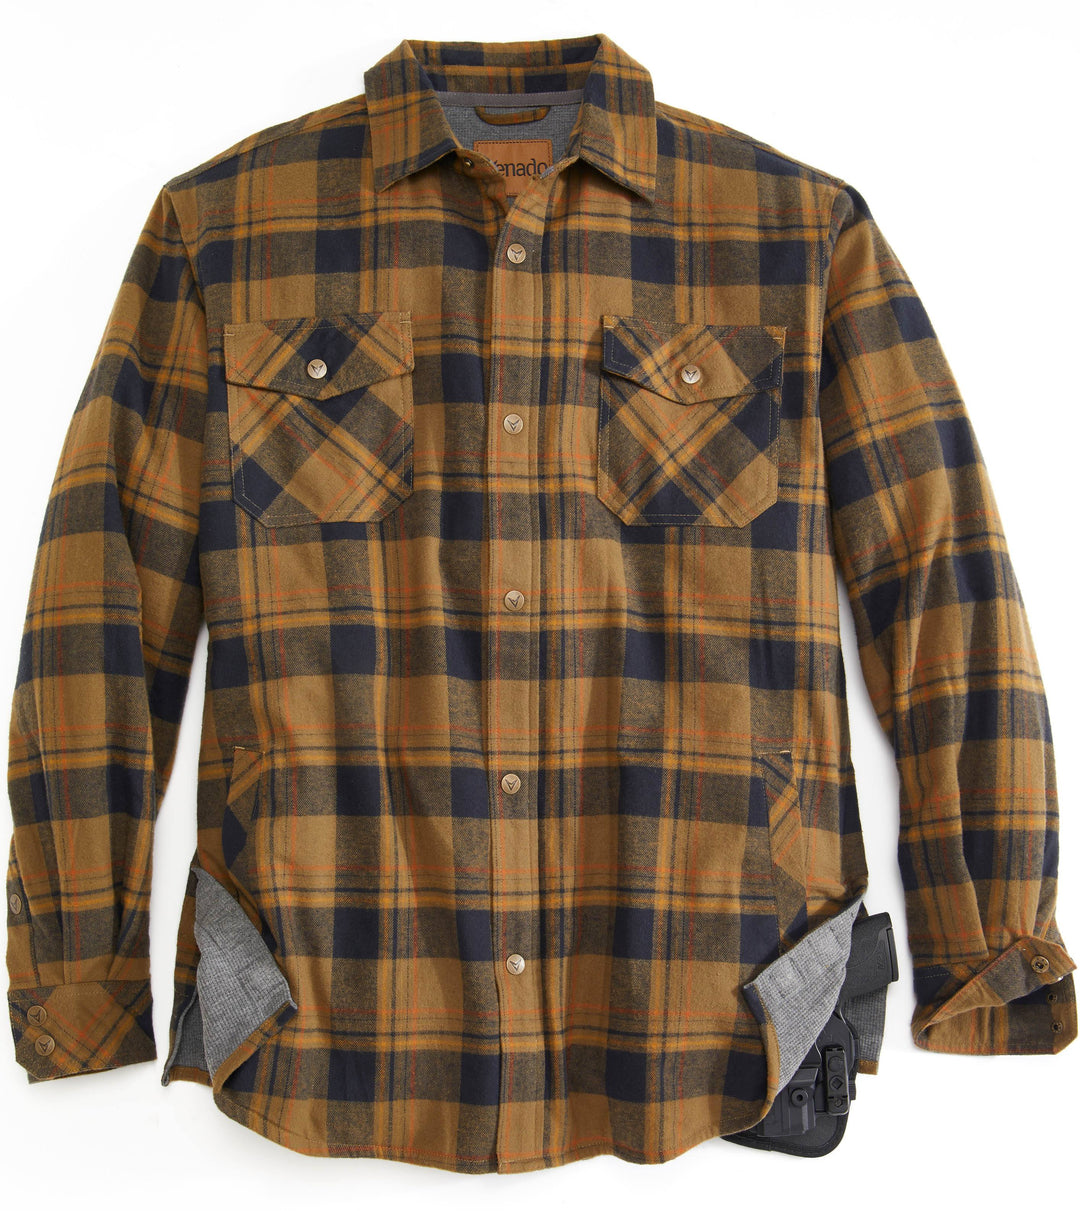 Retreat Thermal Lined Flannel Shirt Jacket Mens Outerwear Venado Small Rustic 